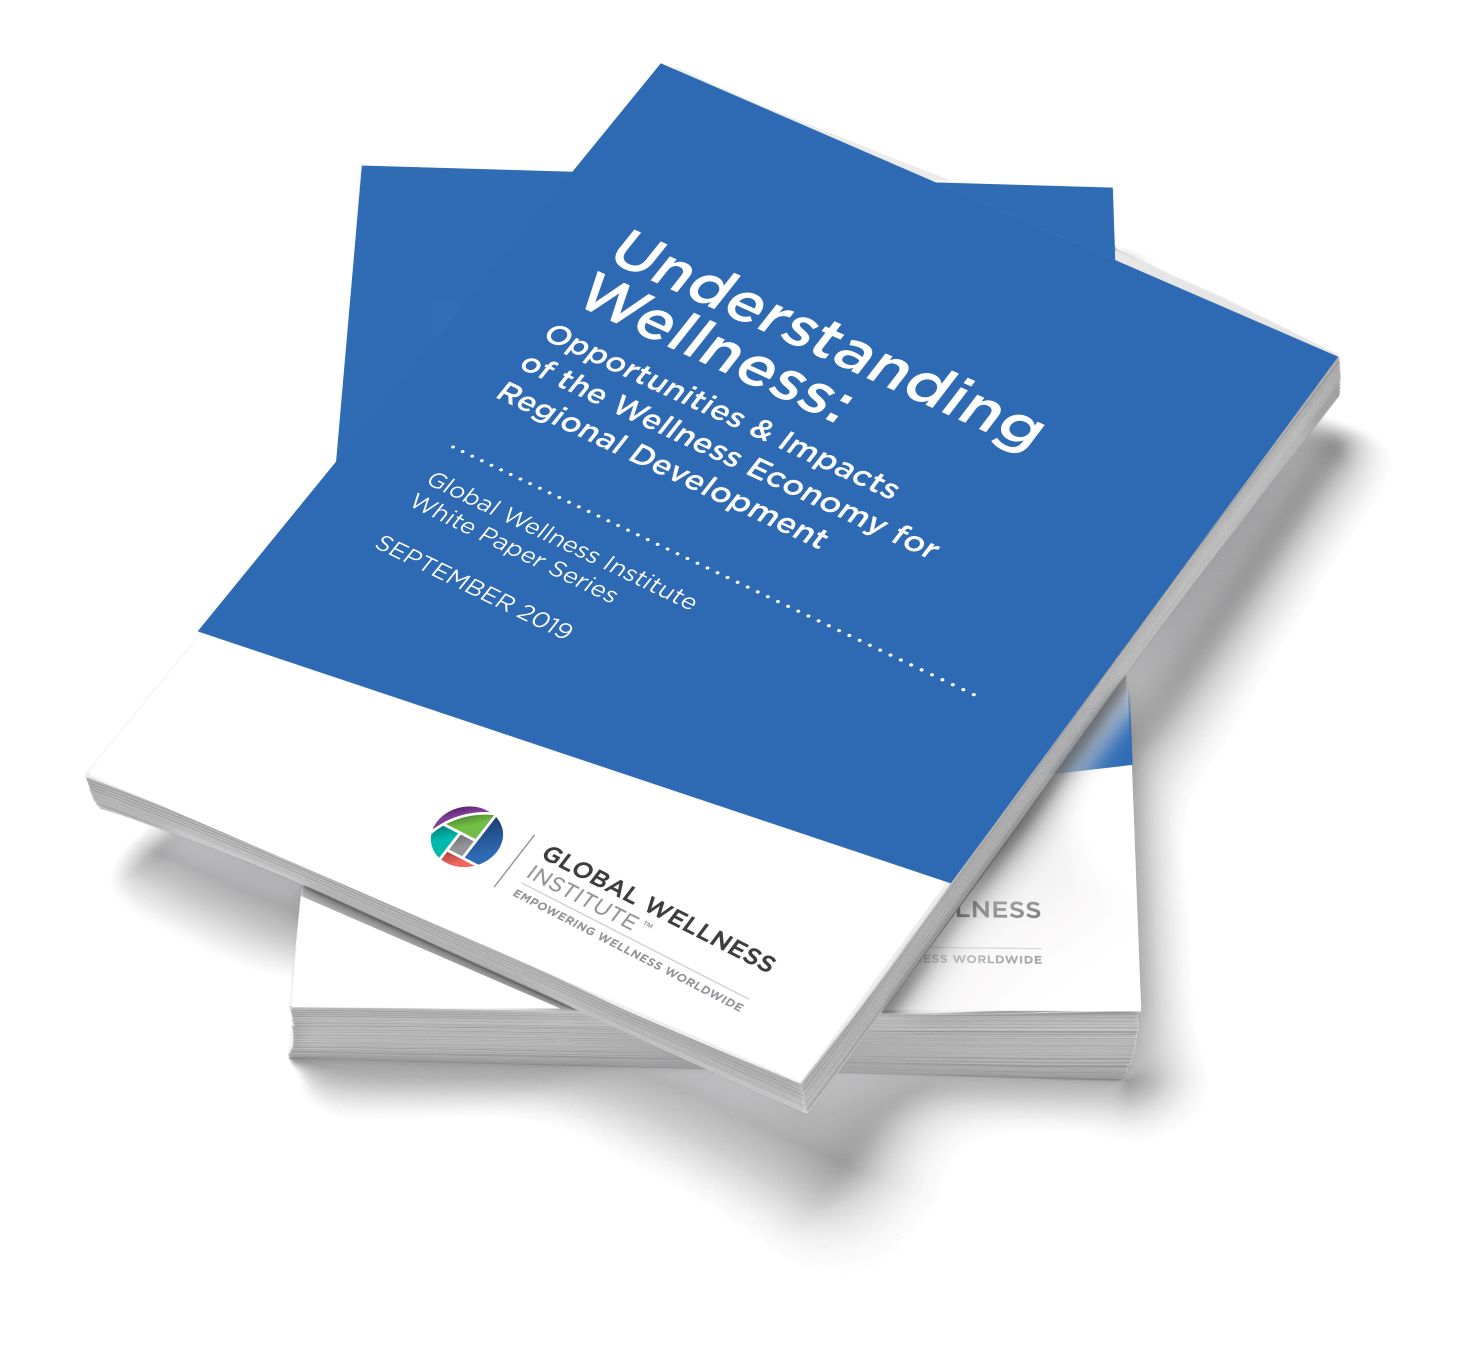 The Global Wellness Institute™ released the second white paper in its “Understanding Wellness” series.